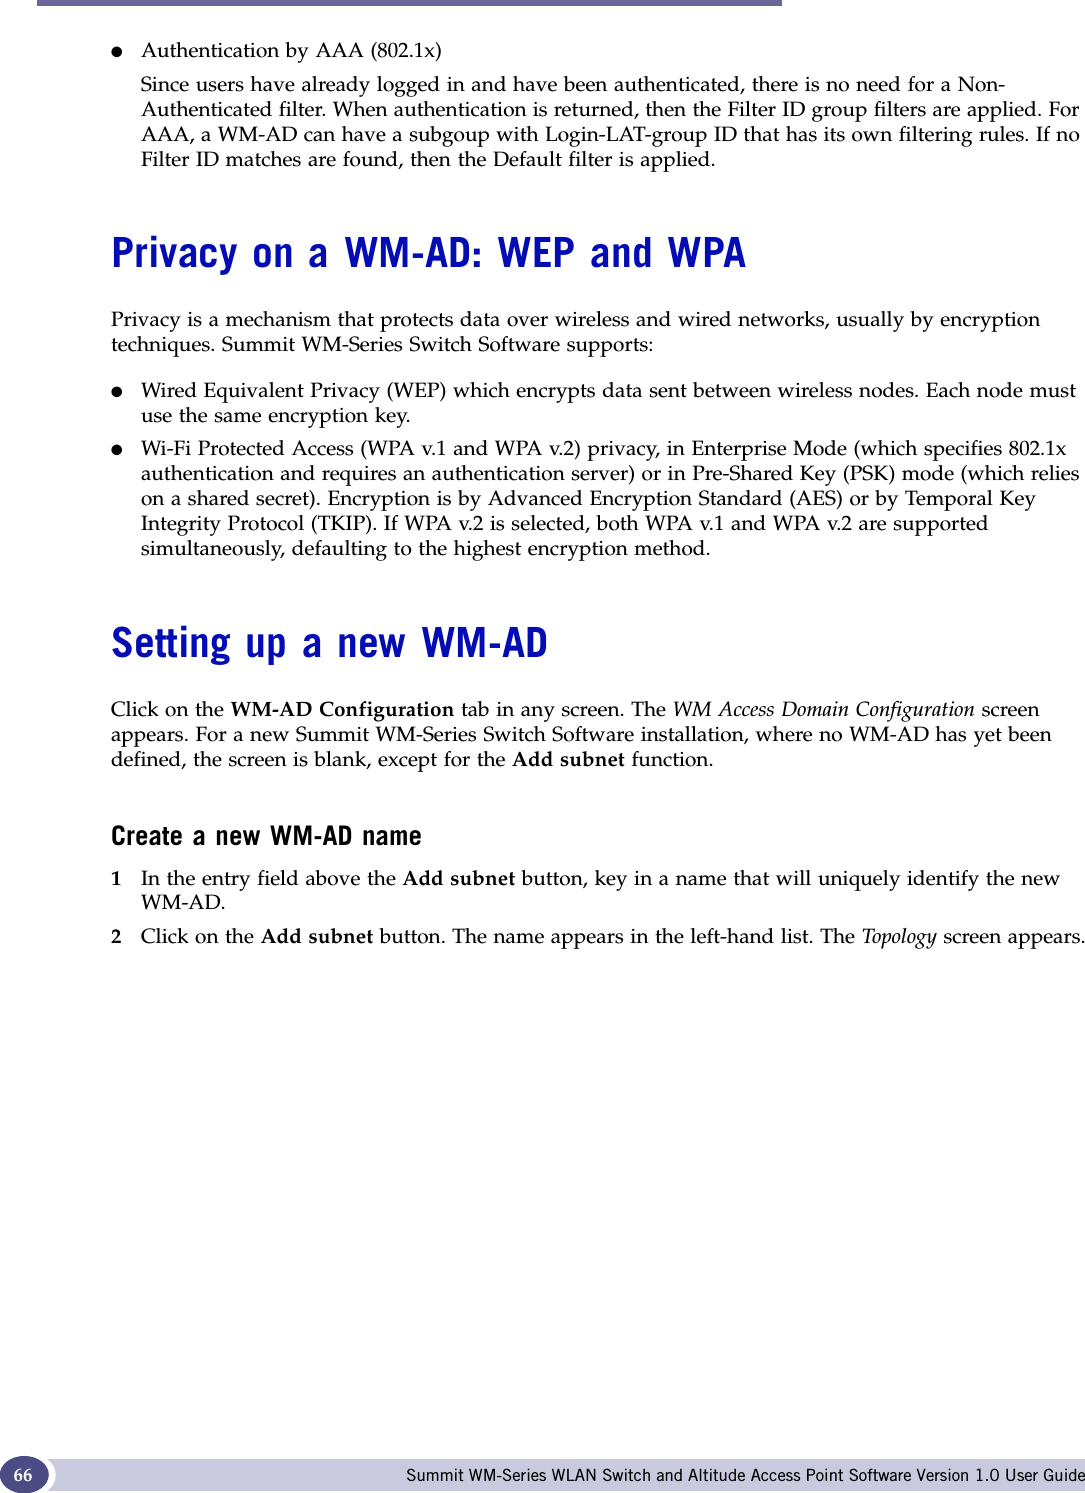 WM Access Domain Services (WM-AD): Introduction Summit WM-Series WLAN Switch and Altitude Access Point Software Version 1.0 User Guide66●Authentication by AAA (802.1x)Since users have already logged in and have been authenticated, there is no need for a Non-Authenticated filter. When authentication is returned, then the Filter ID group filters are applied. For AAA, a WM-AD can have a subgoup with Login-LAT-group ID that has its own filtering rules. If no Filter ID matches are found, then the Default filter is applied. Privacy on a WM-AD: WEP and WPAPrivacy is a mechanism that protects data over wireless and wired networks, usually by encryption techniques. Summit WM-Series Switch Software supports:●Wired Equivalent Privacy (WEP) which encrypts data sent between wireless nodes. Each node must use the same encryption key.●Wi-Fi Protected Access (WPA v.1 and WPA v.2) privacy, in Enterprise Mode (which specifies 802.1x authentication and requires an authentication server) or in Pre-Shared Key (PSK) mode (which relies on a shared secret). Encryption is by Advanced Encryption Standard (AES) or by Temporal Key Integrity Protocol (TKIP). If WPA v.2 is selected, both WPA v.1 and WPA v.2 are supported simultaneously, defaulting to the highest encryption method.Setting up a new WM-ADClick on the WM-AD Configuration tab in any screen. The WM Access Domain Configuration screen appears. For a new Summit WM-Series Switch Software installation, where no WM-AD has yet been defined, the screen is blank, except for the Add subnet function.Create a new WM-AD name1In the entry field above the Add subnet button, key in a name that will uniquely identify the new WM-AD.2Click on the Add subnet button. The name appears in the left-hand list. The Top o log y screen appears.